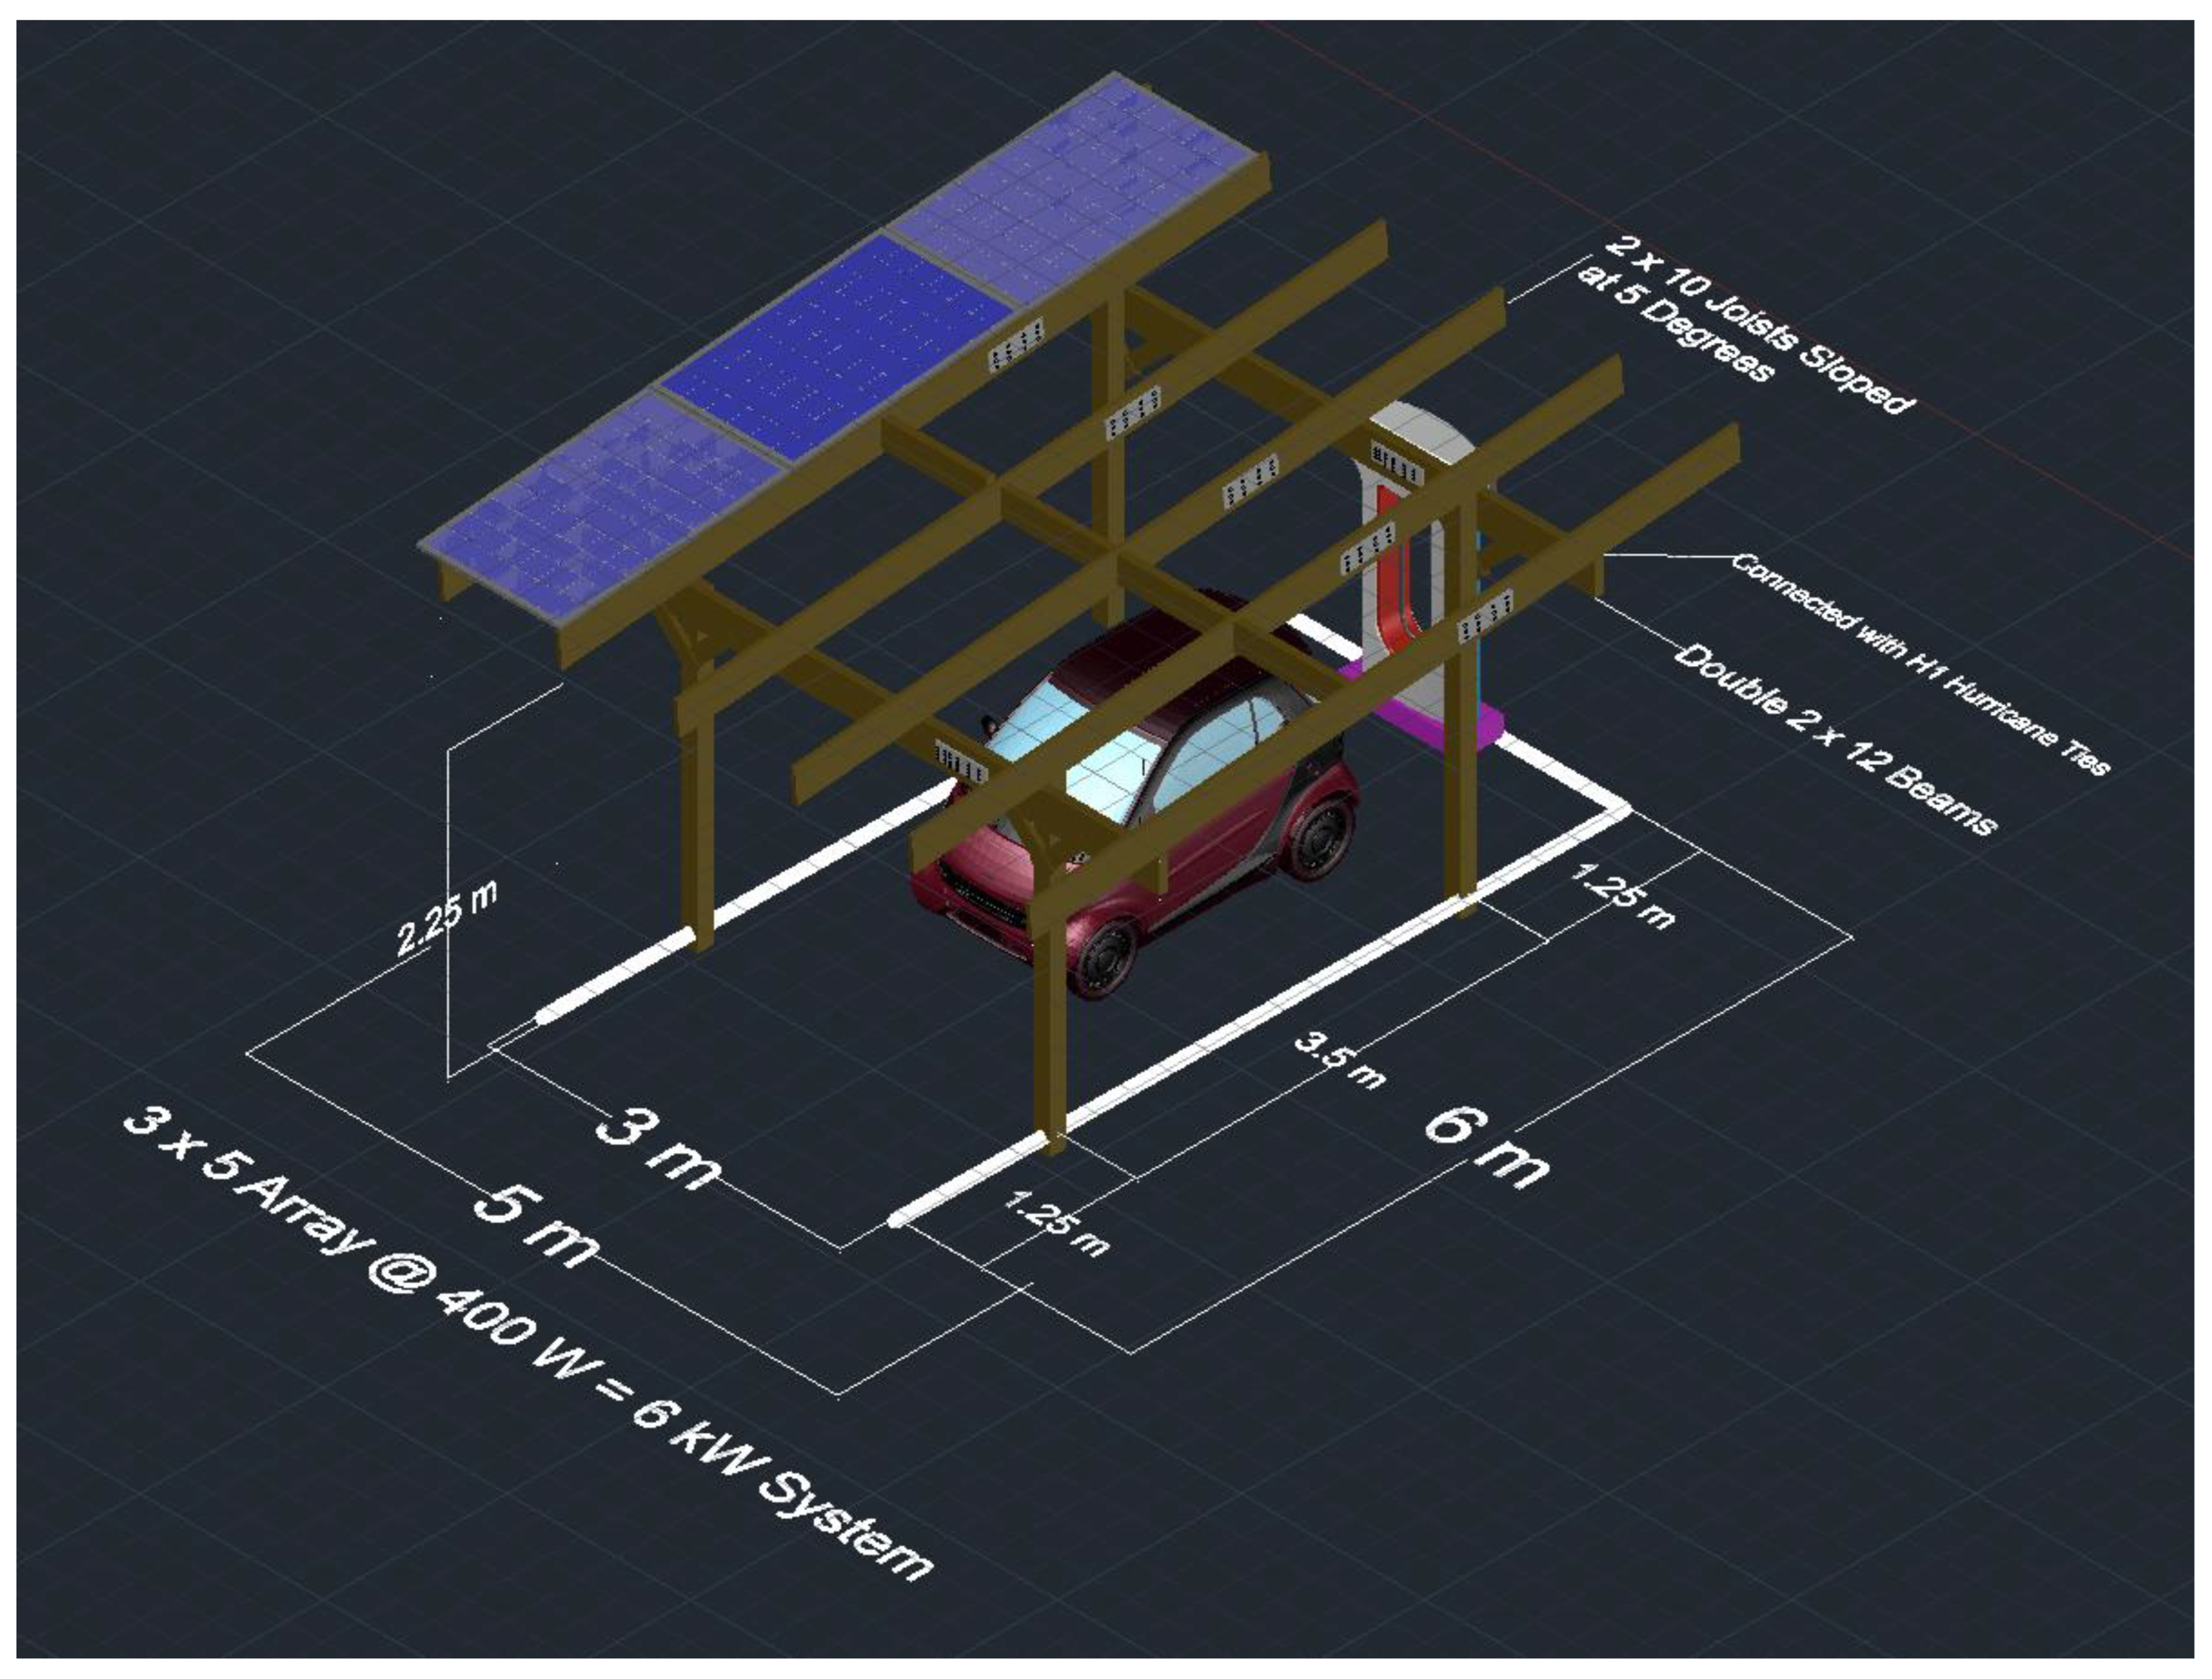 Image of a single car PV canopy.